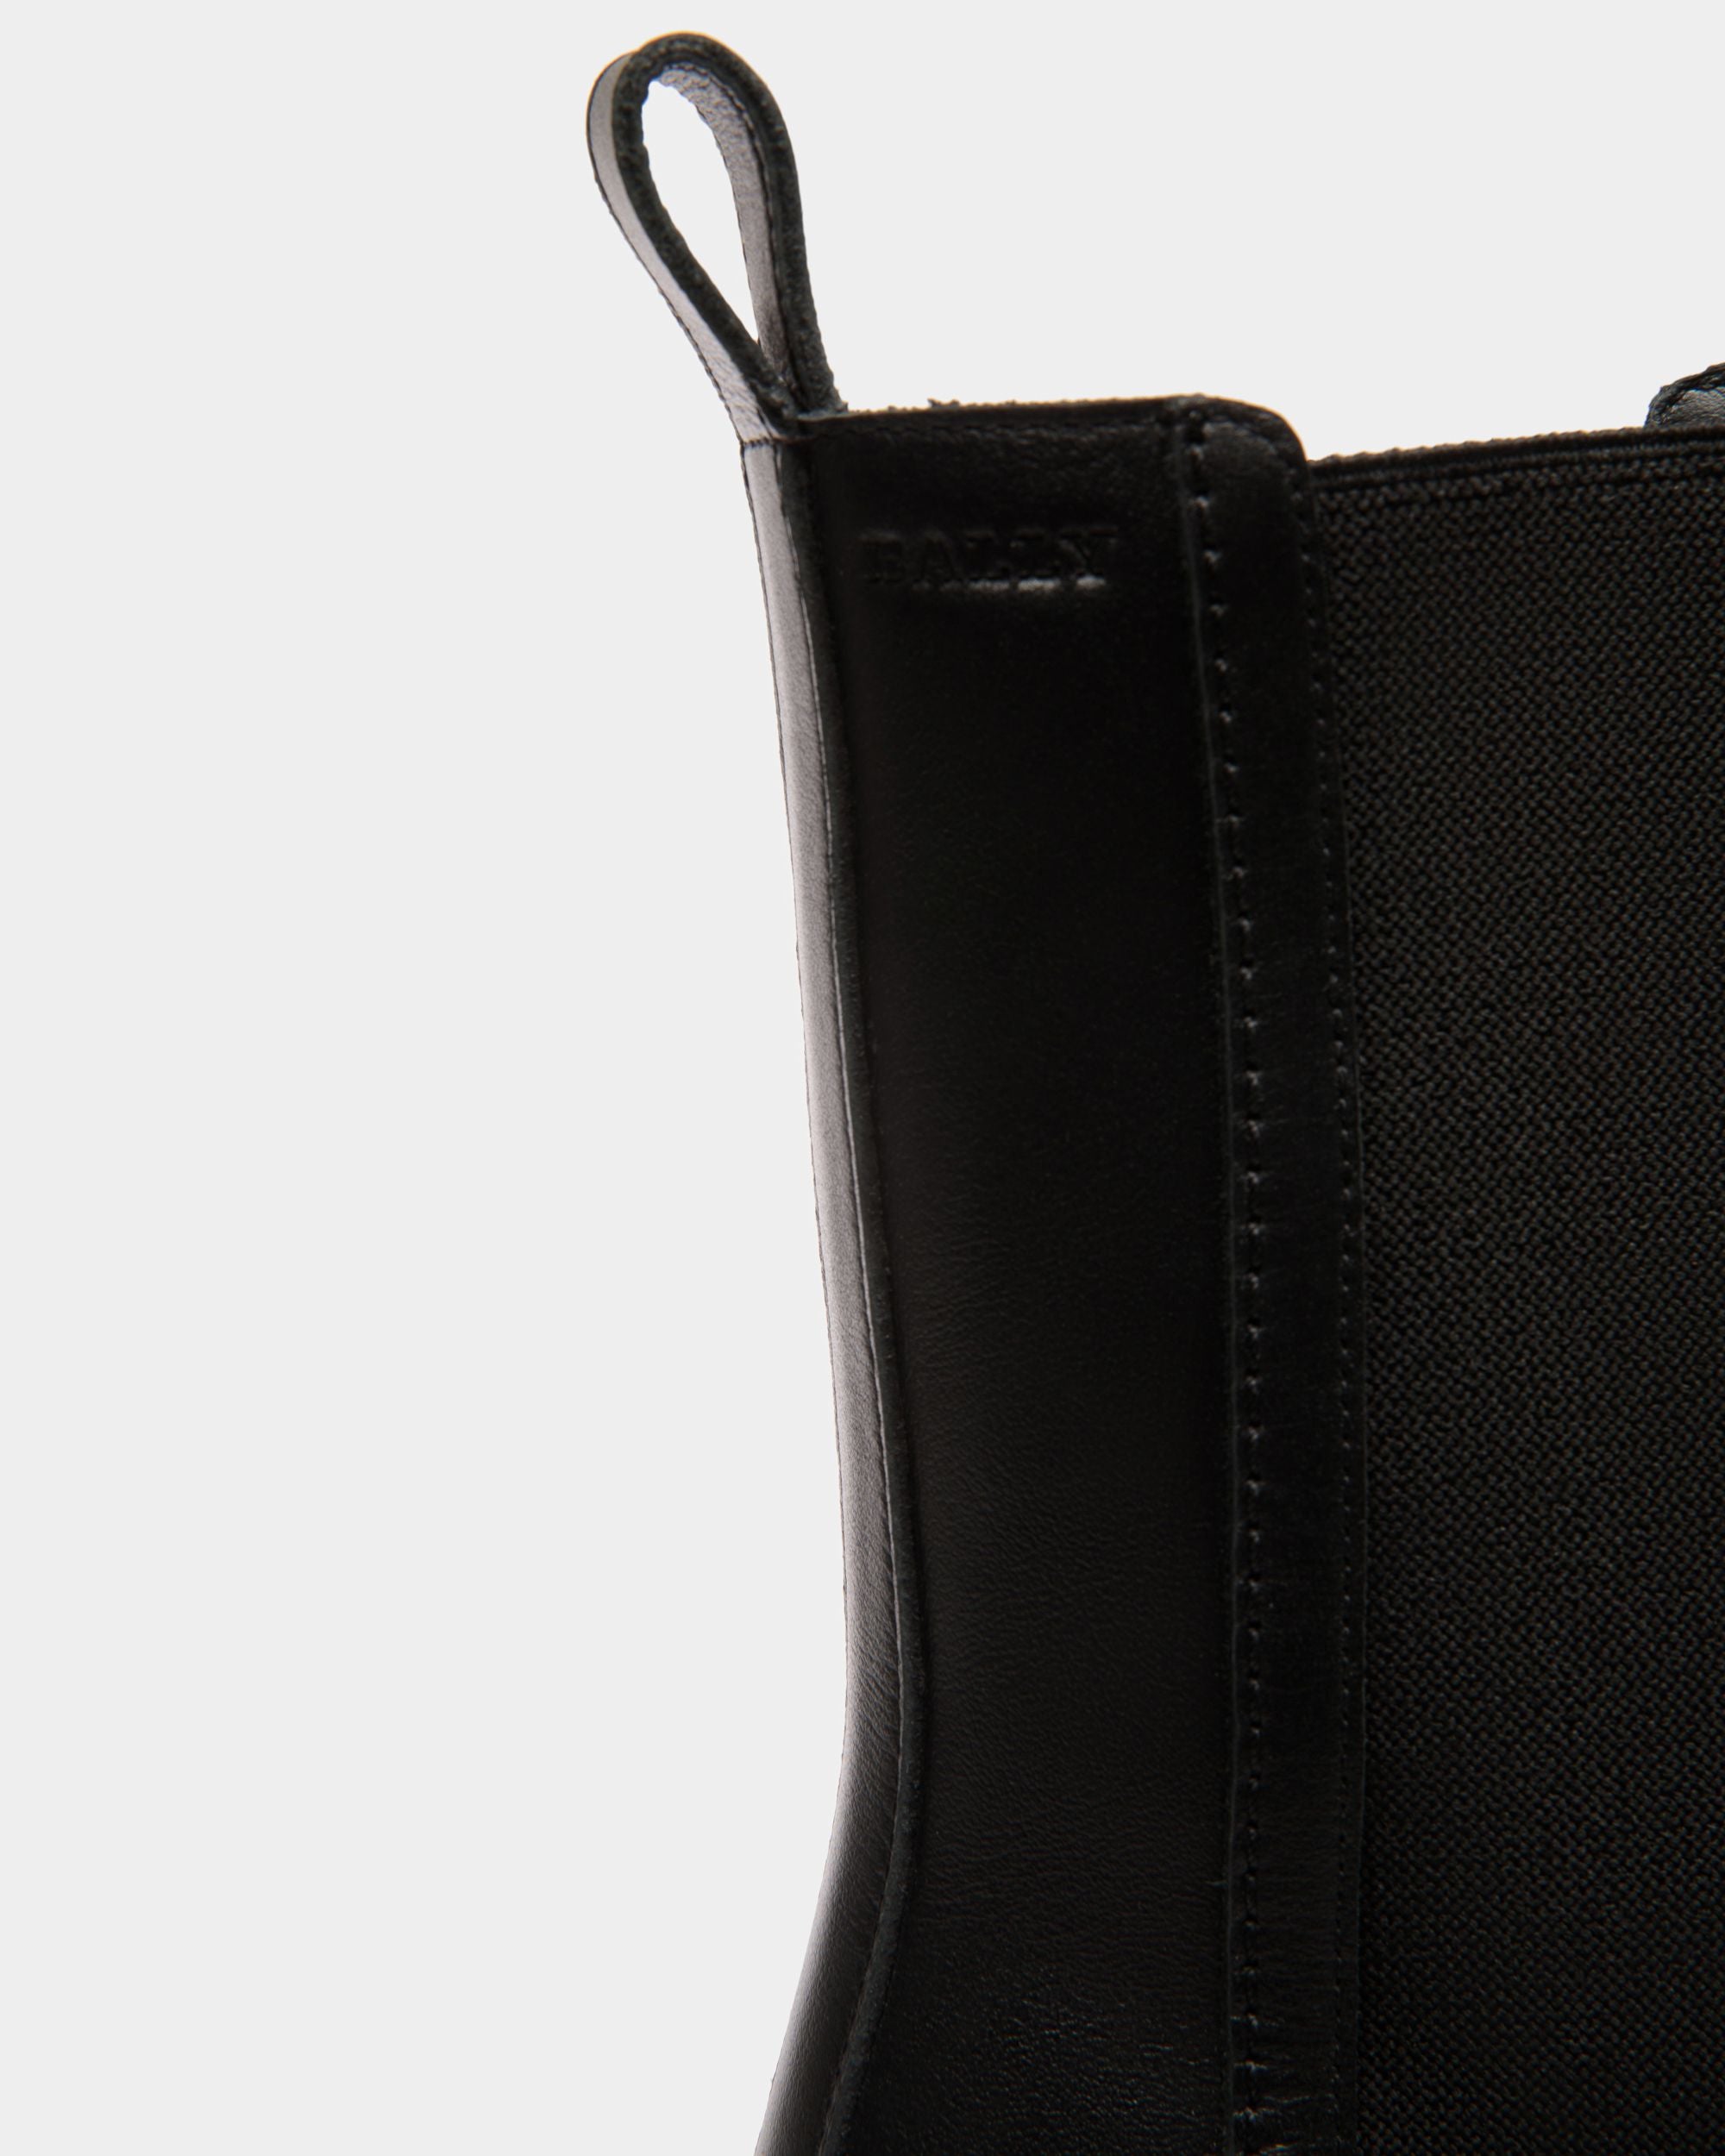 Nalyna | Women's Boots | Black Leather | Bally | Still Life Detail